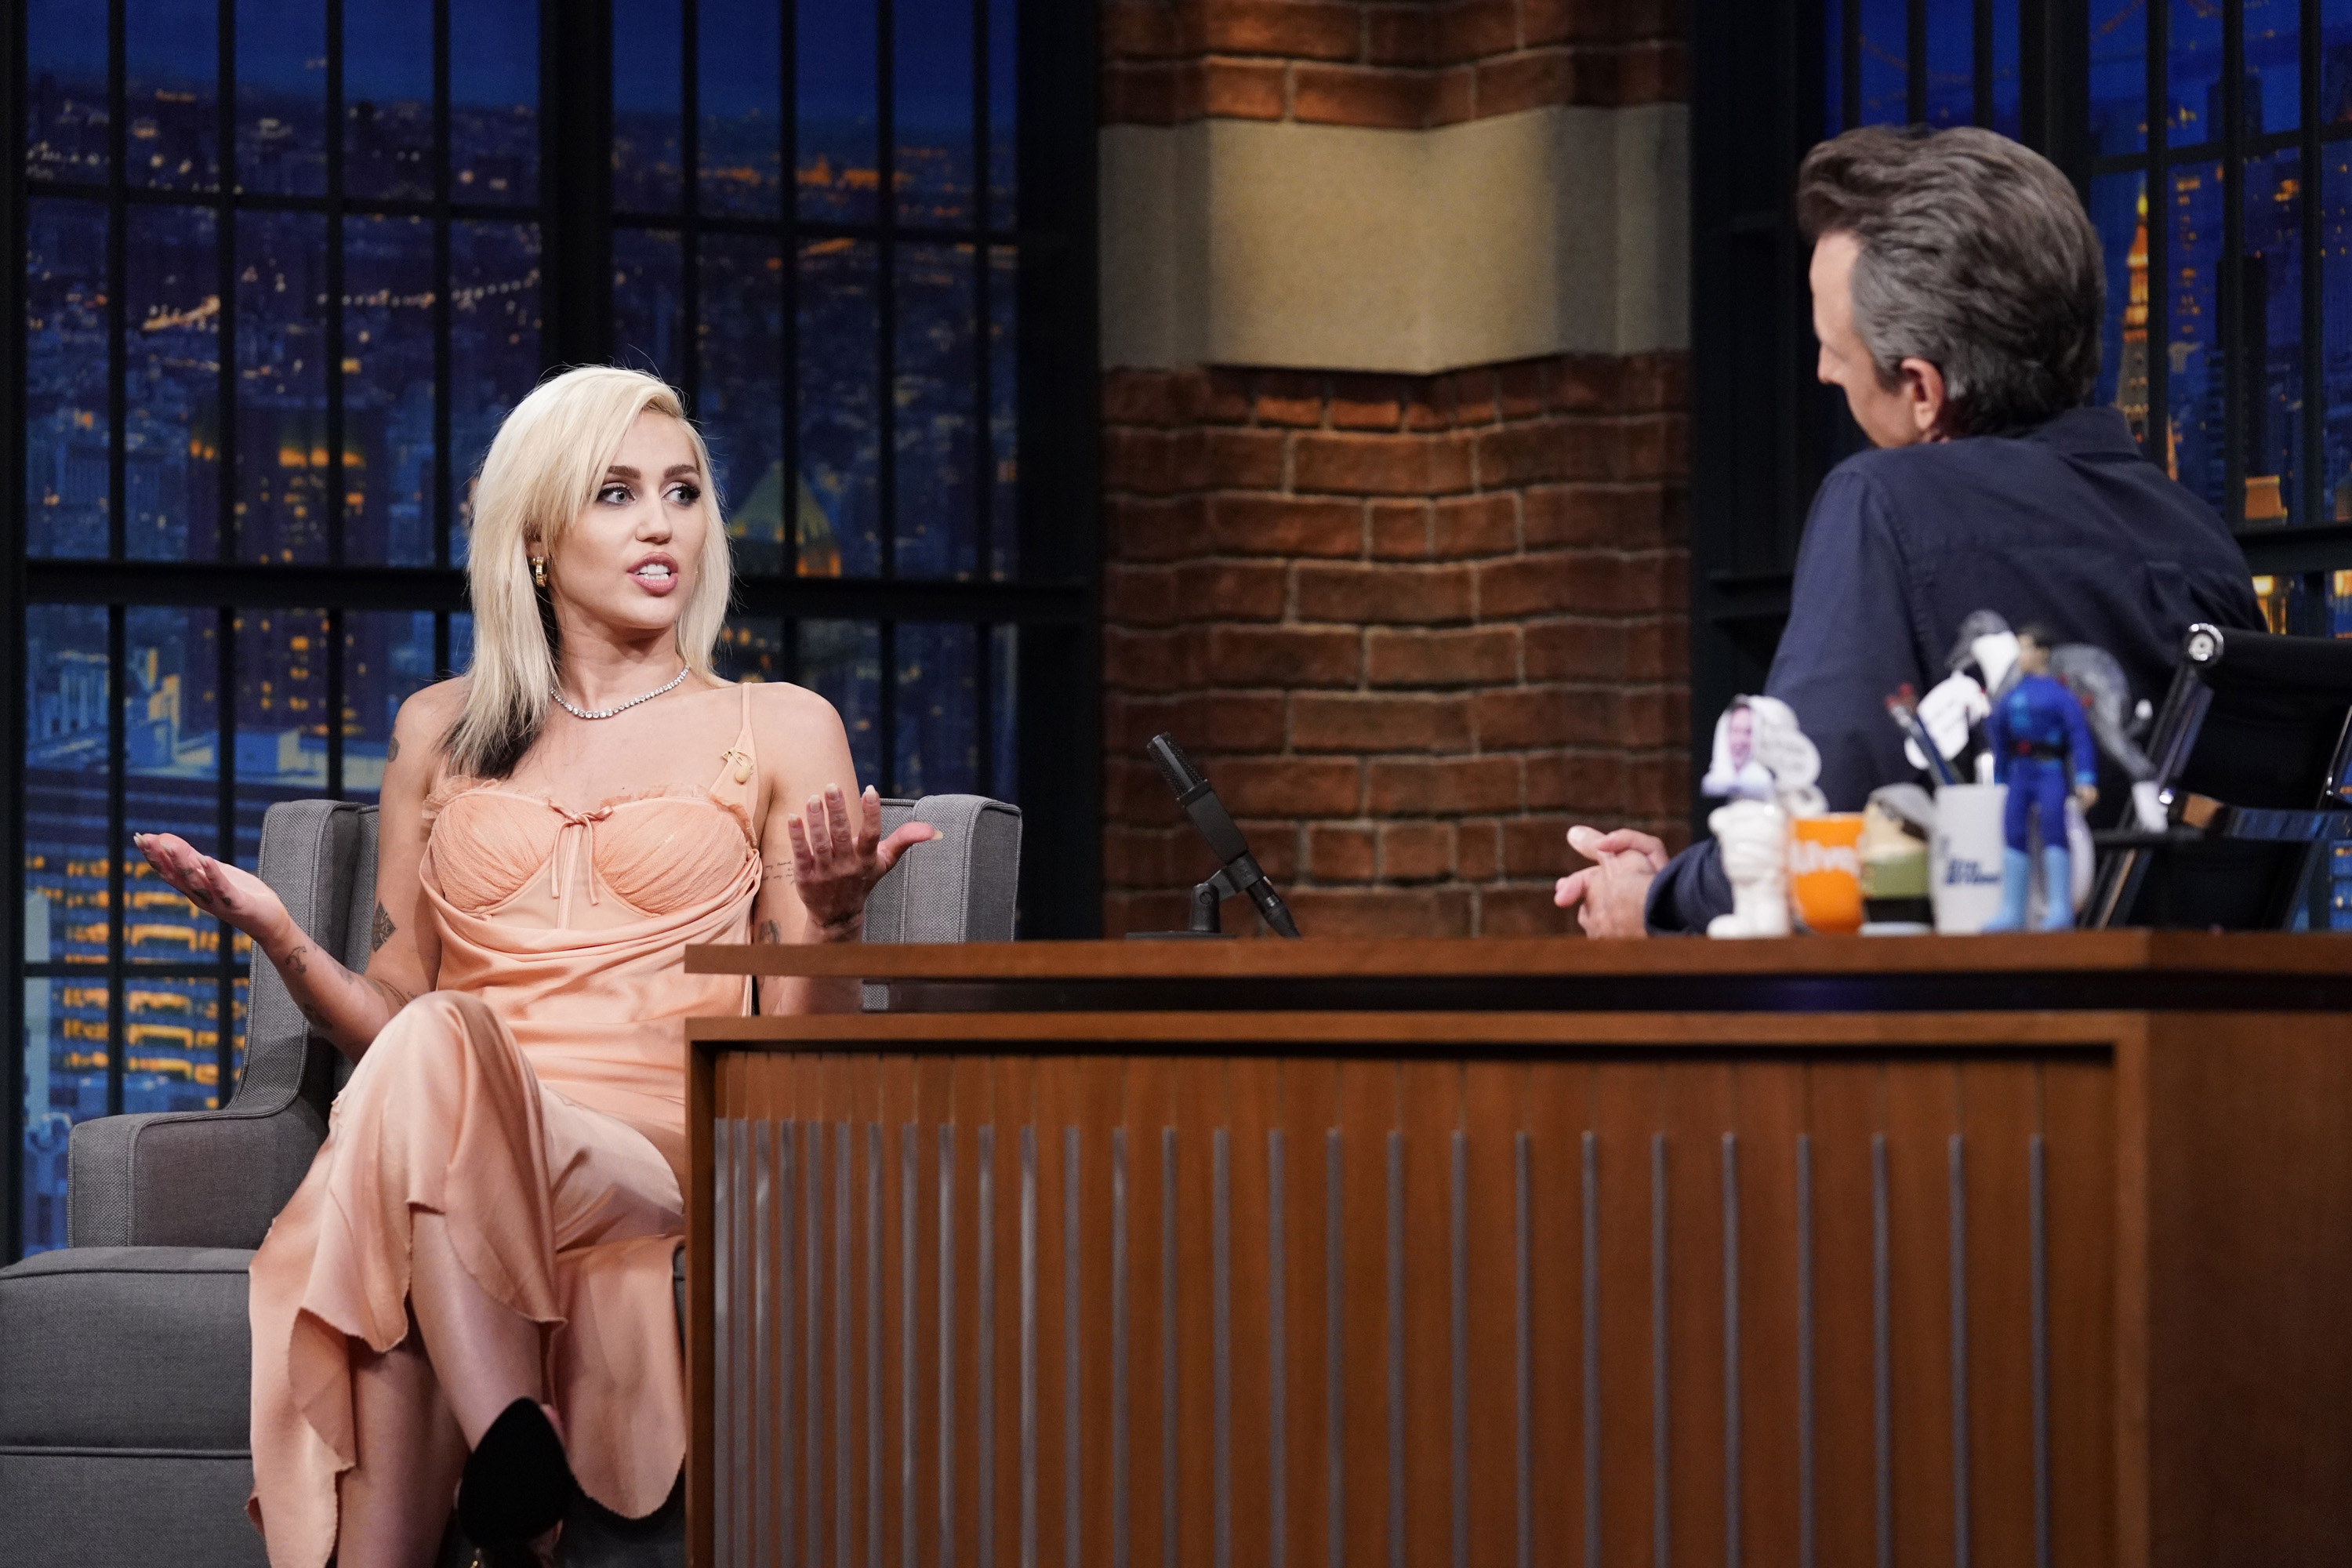 Miley Cyrus being interviewed by Seth Meyers